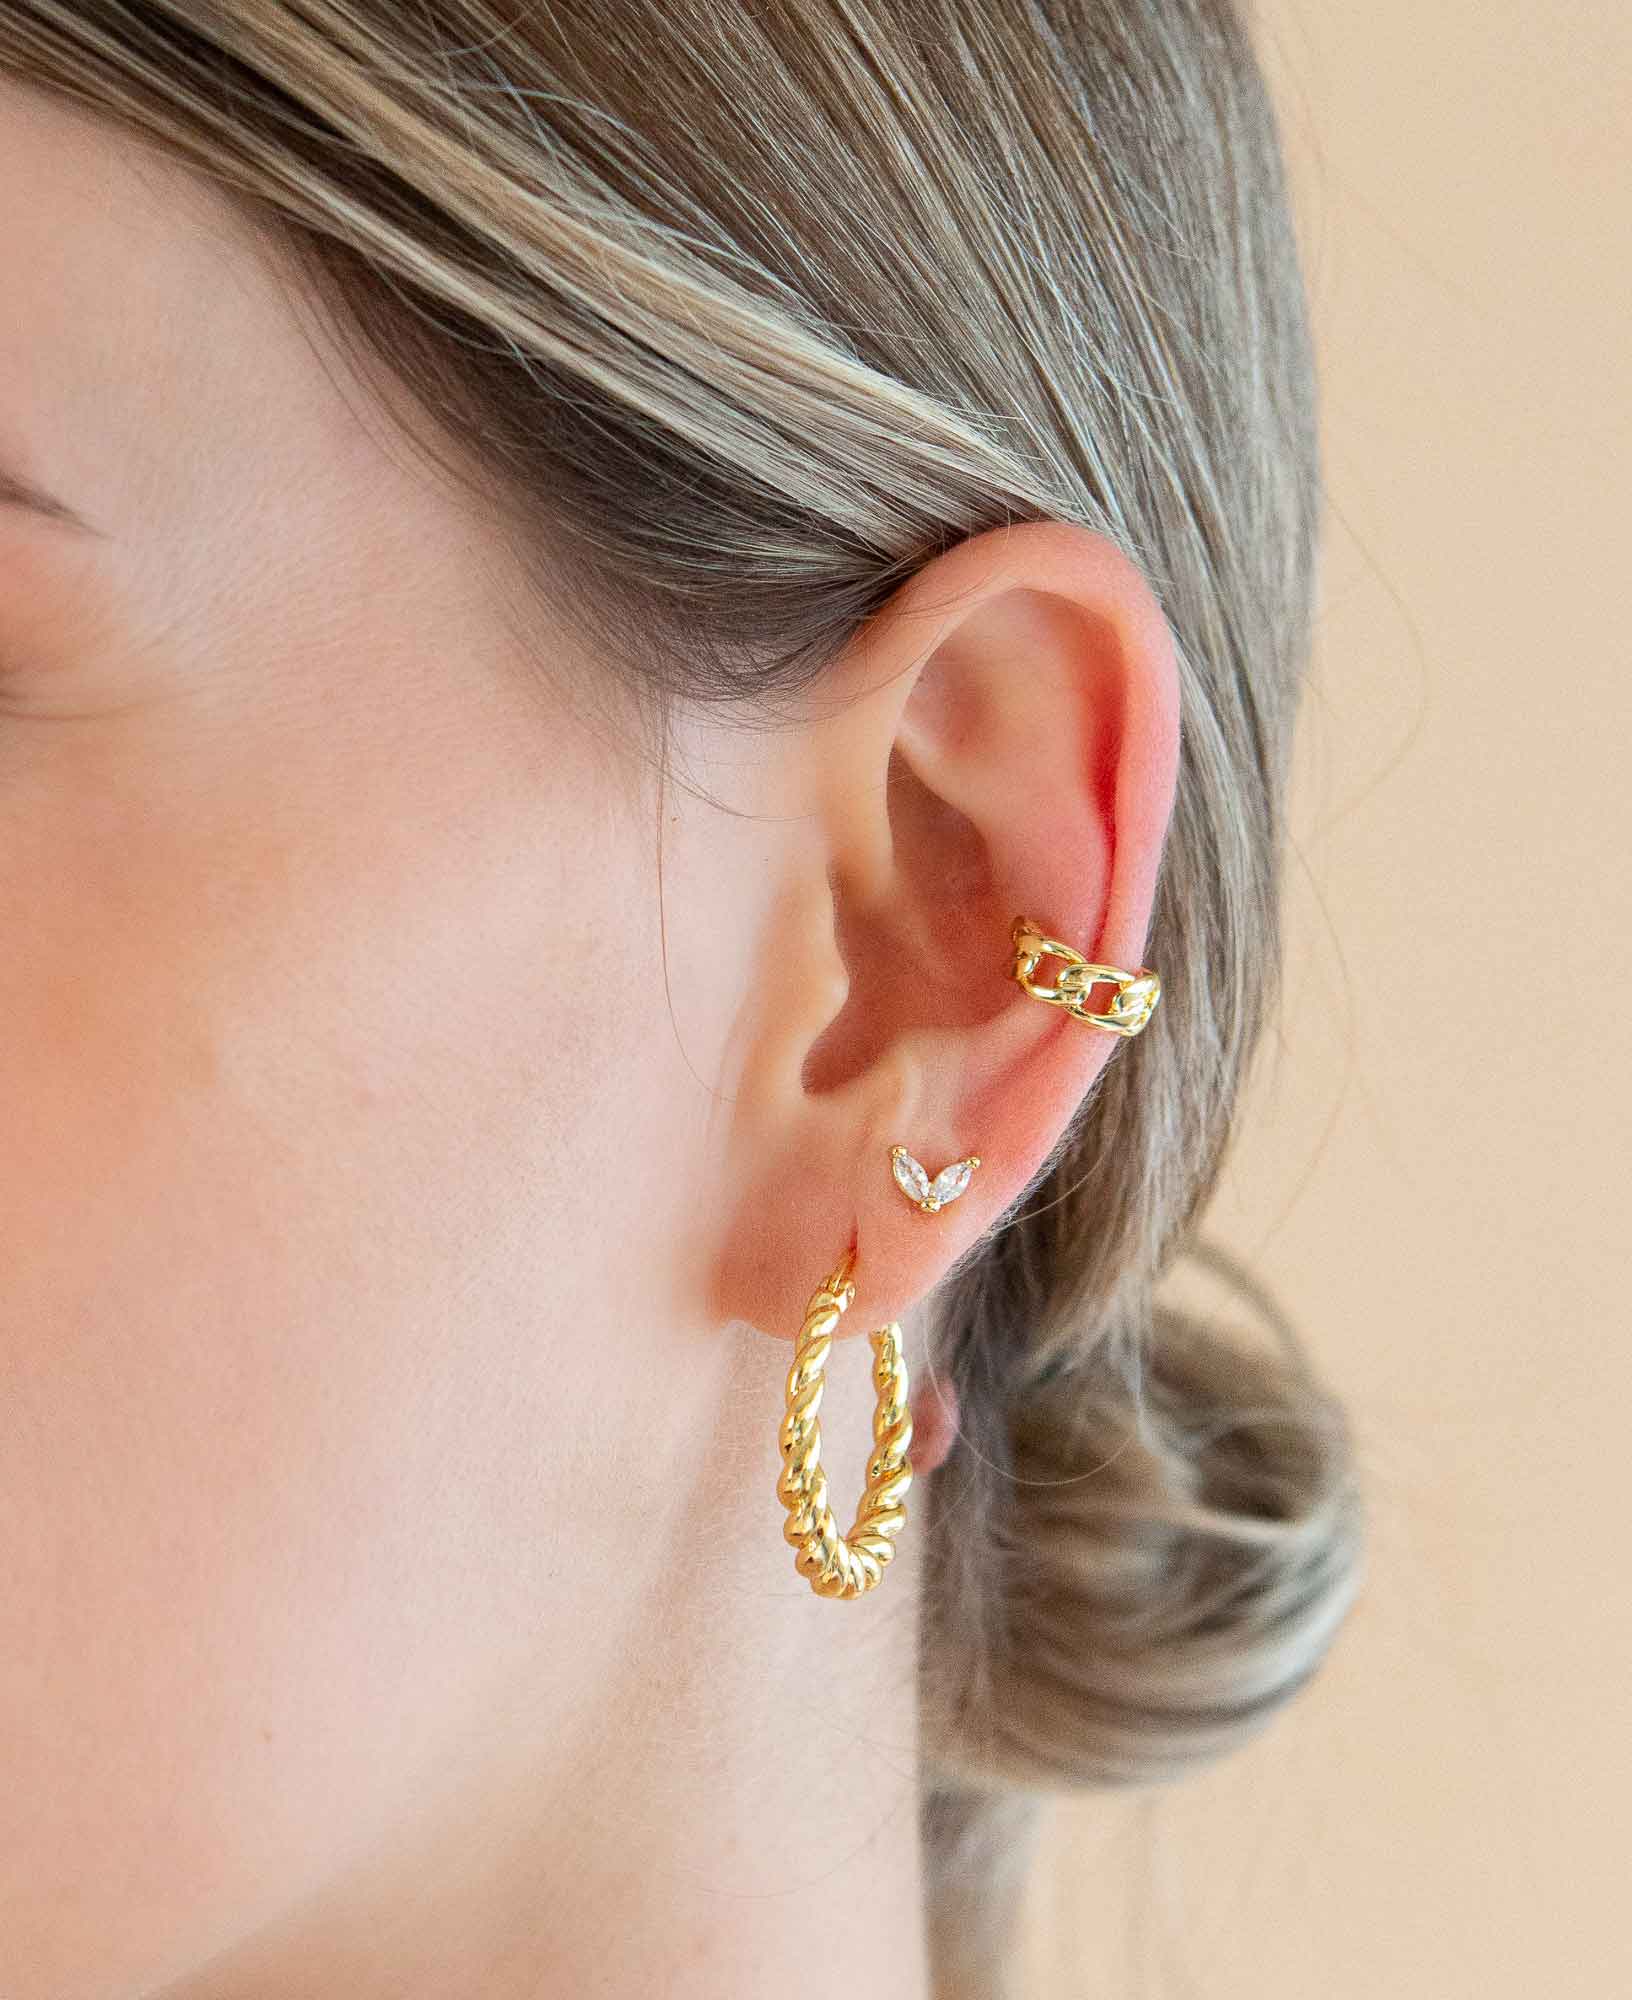 Lenette 14k Gold Chain Ear Cuff from Sachelle COllective